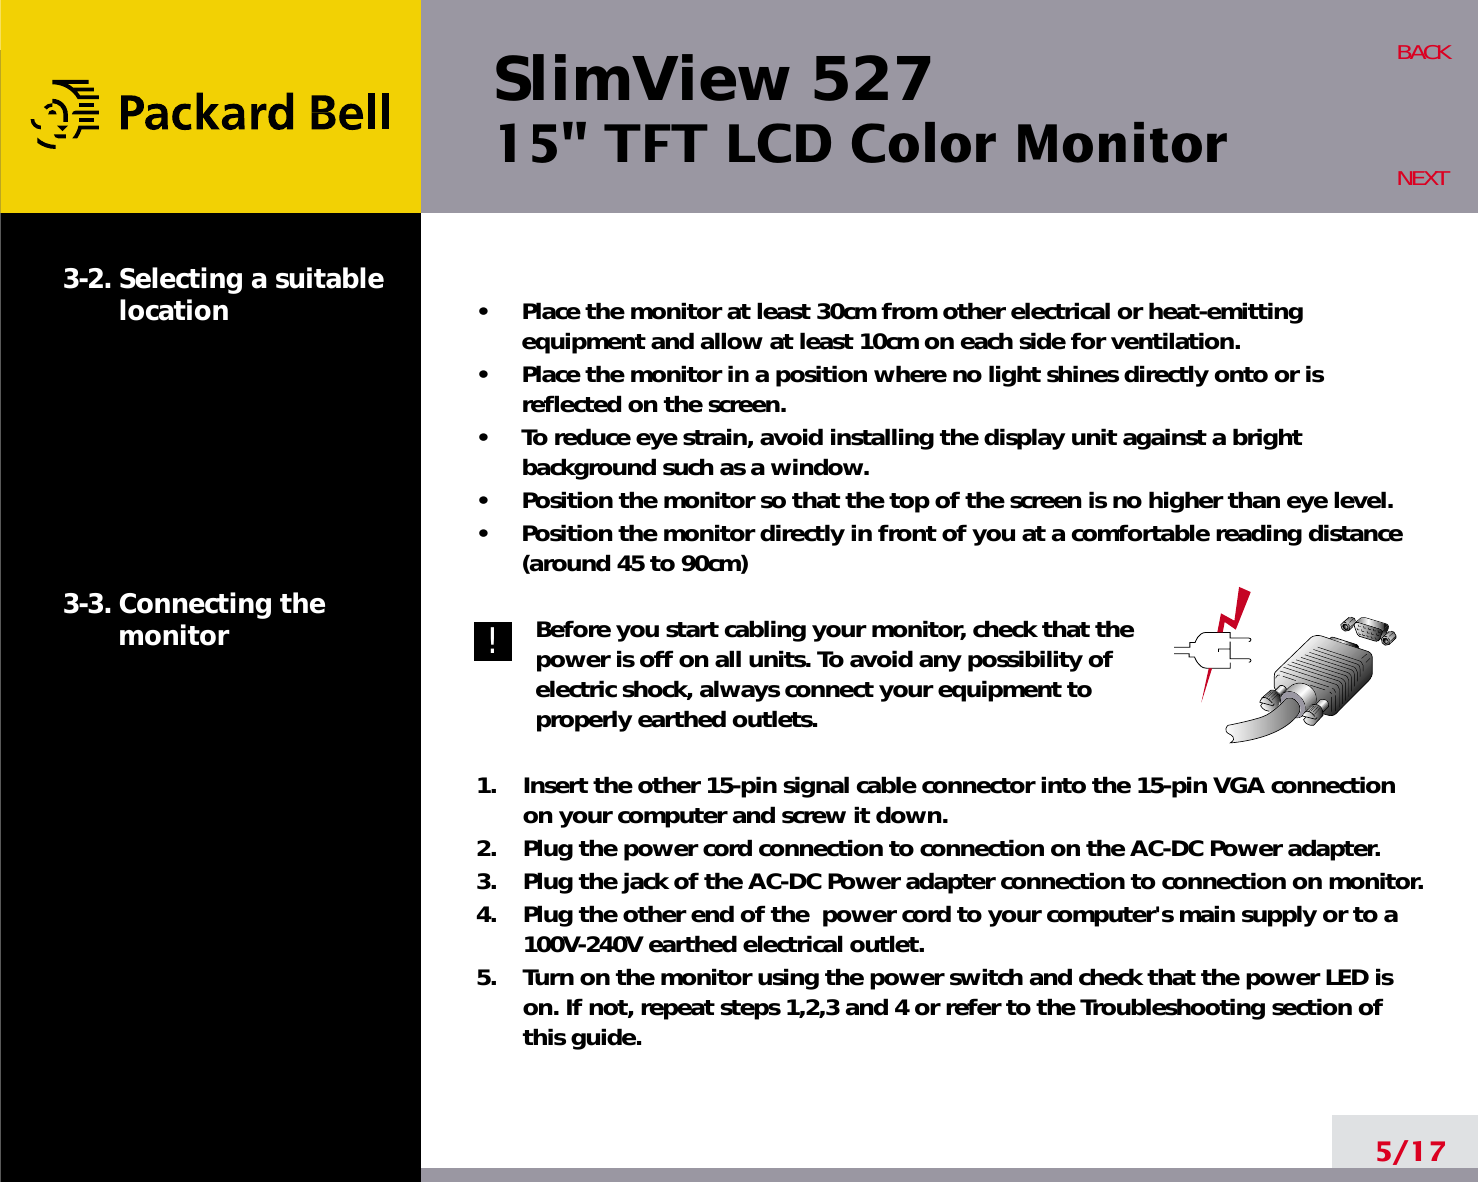 SlimView 52715&quot; TFT LCD Color Monitor5/17BACKNEXT3-2. Selecting a suitablelocation3-3. Connecting the monitor•     Place the monitor at least 30cm from other electrical or heat-emittingequipment and allow at least 10cm on each side for ventilation.•     Place the monitor in a position where no light shines directly onto or isreflected on the screen.•     To reduce eye strain, avoid installing the display unit against a brightbackground such as a window.•     Position the monitor so that the top of the screen is no higher than eye level.•     Position the monitor directly in front of you at a comfortable reading distance(around 45 to 90cm) Before you start cabling your monitor, check that thepower is off on all units. To avoid any possibility ofelectric shock, always connect your equipment toproperly earthed outlets.1.    Insert the other 15-pin signal cable connector into the 15-pin VGA connectionon your computer and screw it down. 2.    Plug the power cord connection to connection on the AC-DC Power adapter.3.    Plug the jack of the AC-DC Power adapter connection to connection on monitor.4.    Plug the other end of the  power cord to your computer&apos;s main supply or to a100V-240V earthed electrical outlet.5.    Turn on the monitor using the power switch and check that the power LED ison. If not, repeat steps 1,2,3 and 4 or refer to the Troubleshooting section ofthis guide.!!